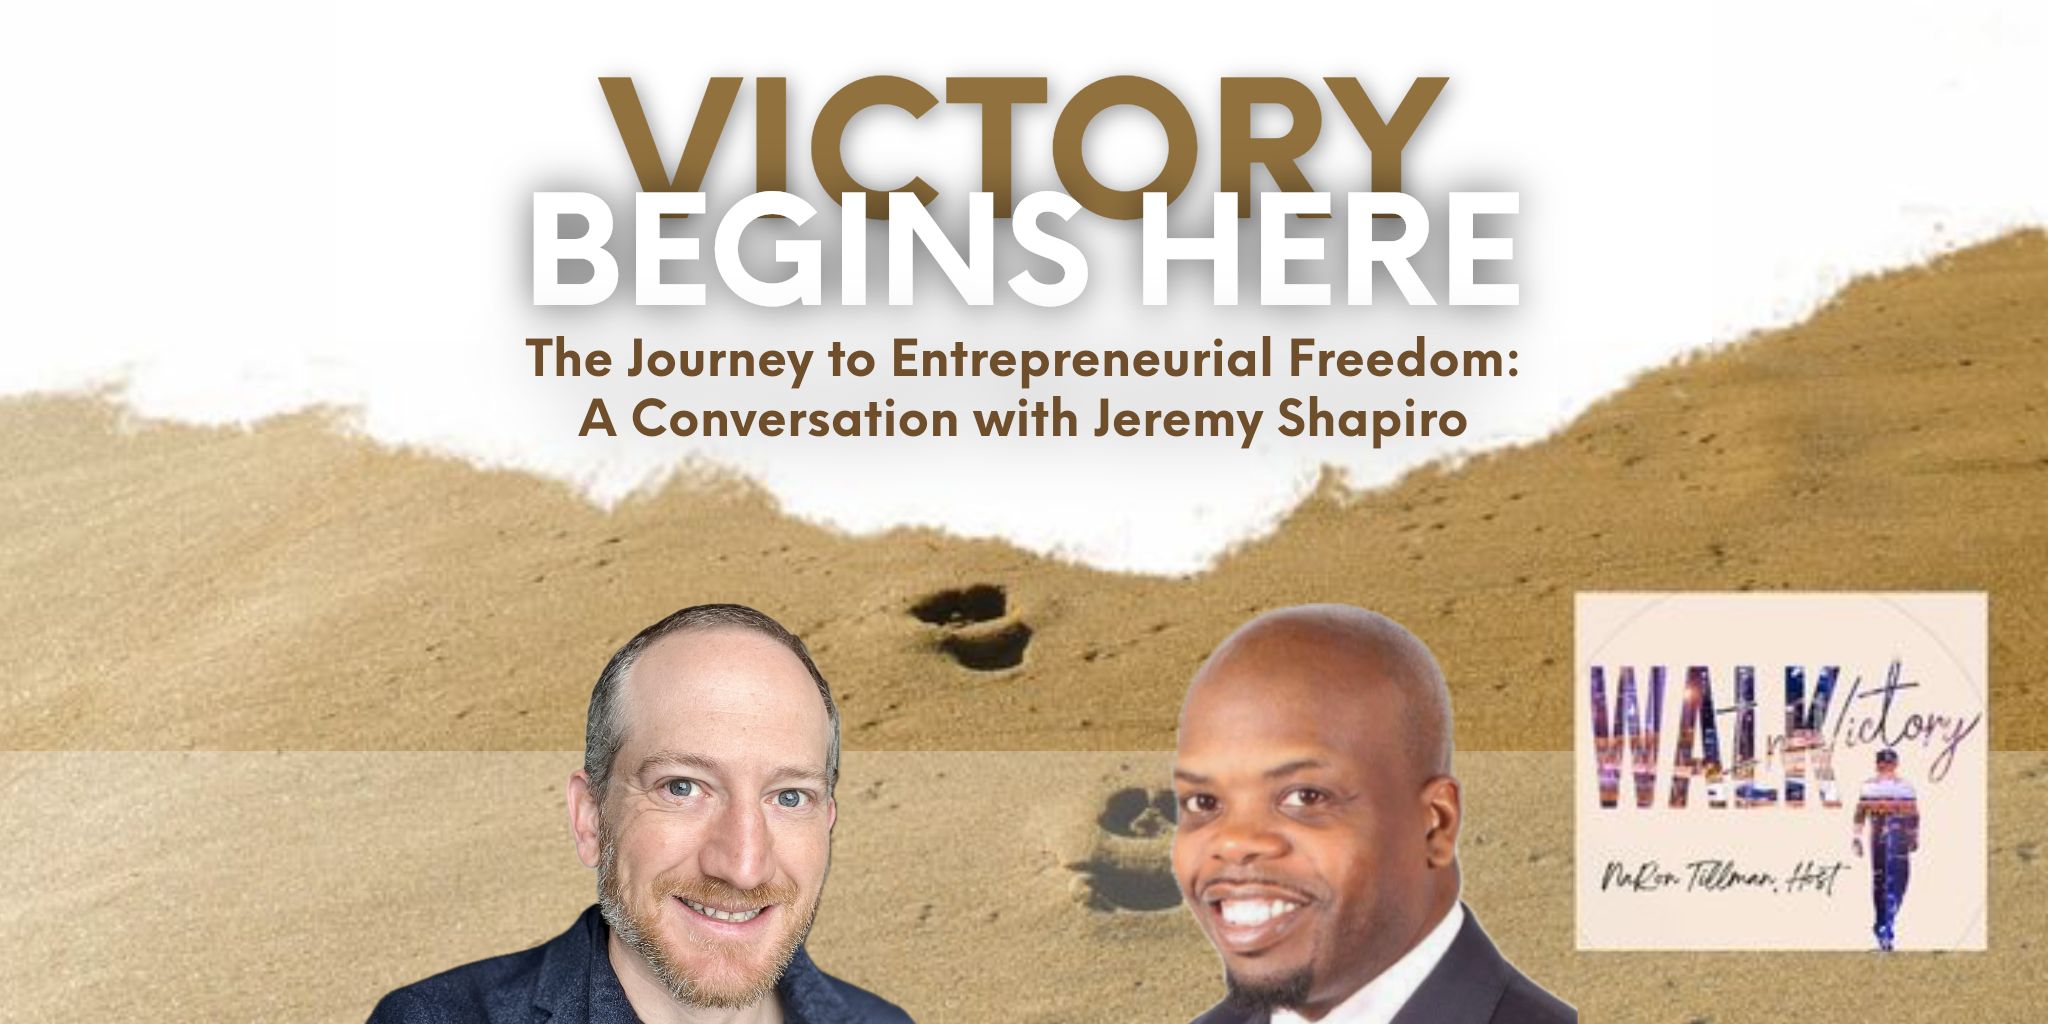 Walk in Victory: The Journey to Entrepreneurial Freedom